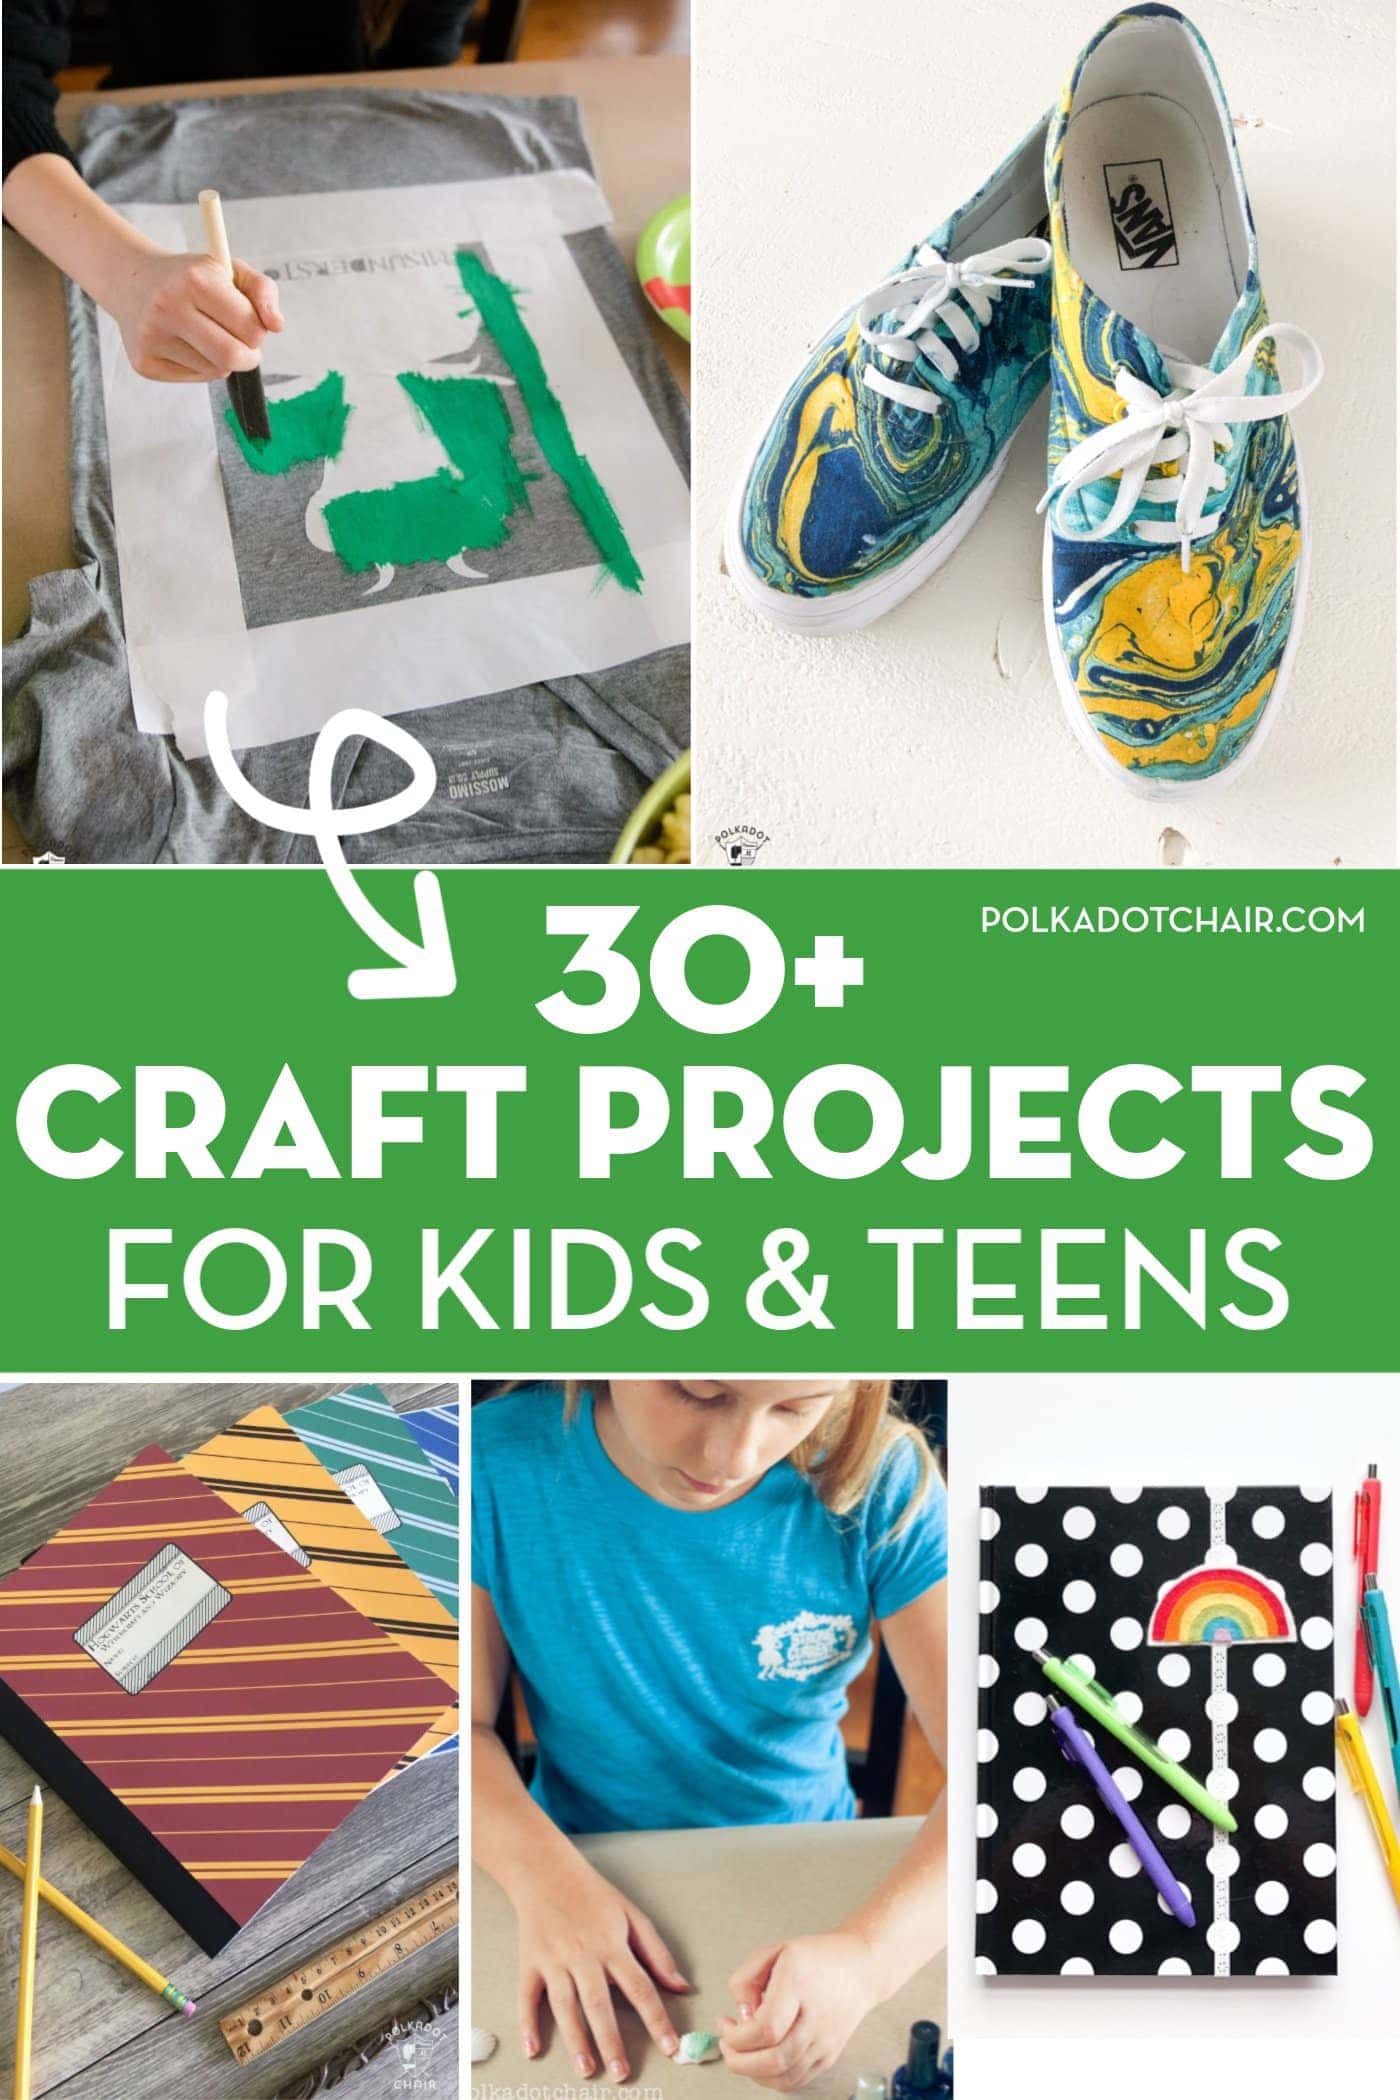 30+ Fun and Creative Crafts Projects for Kids & Teens